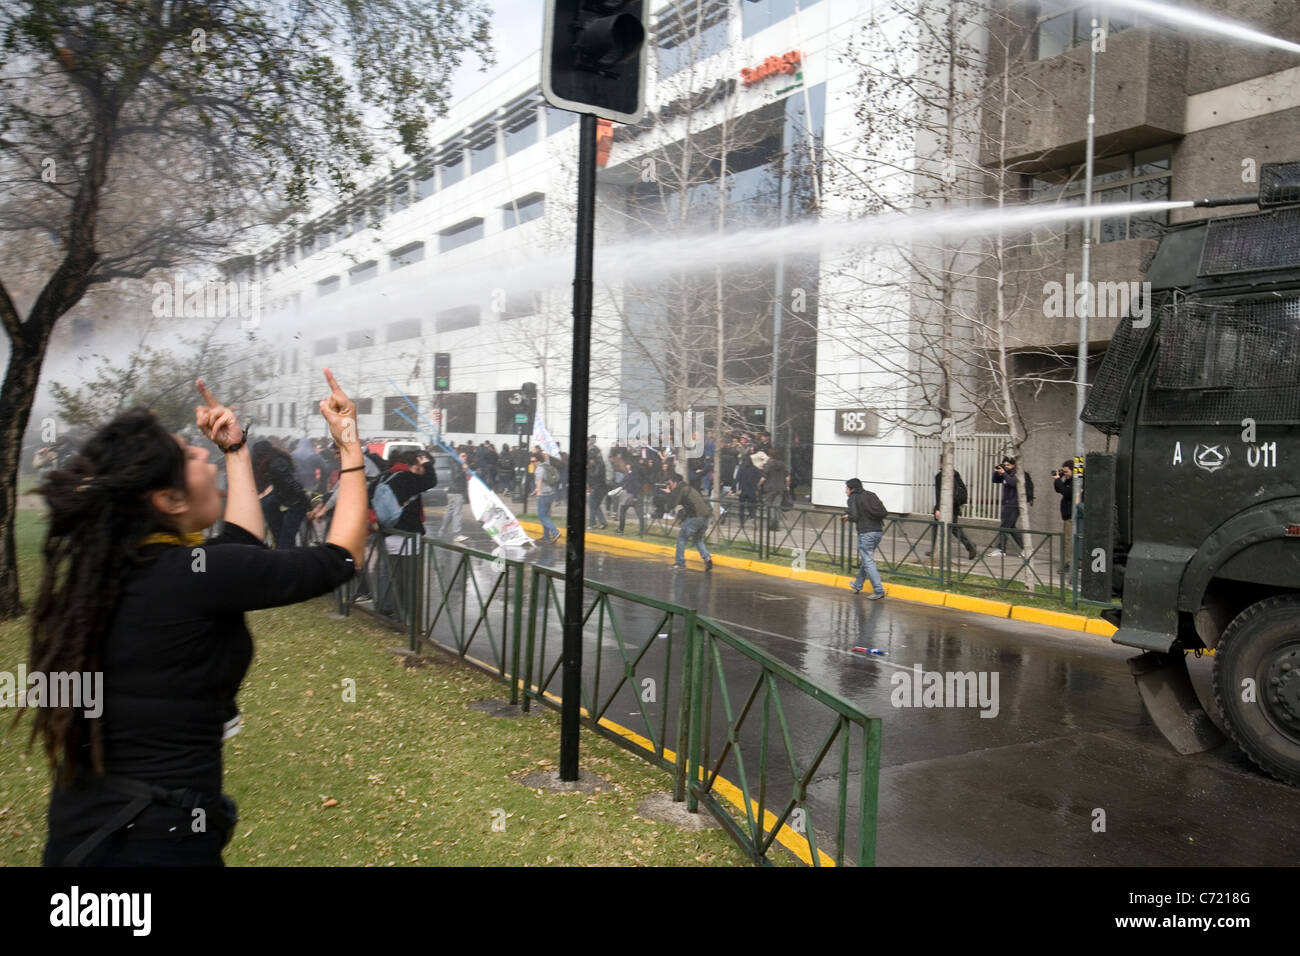 A young girl is reacting against the police decision to disperse the student protest with water cannons, Santiago de Chile Stock Photo